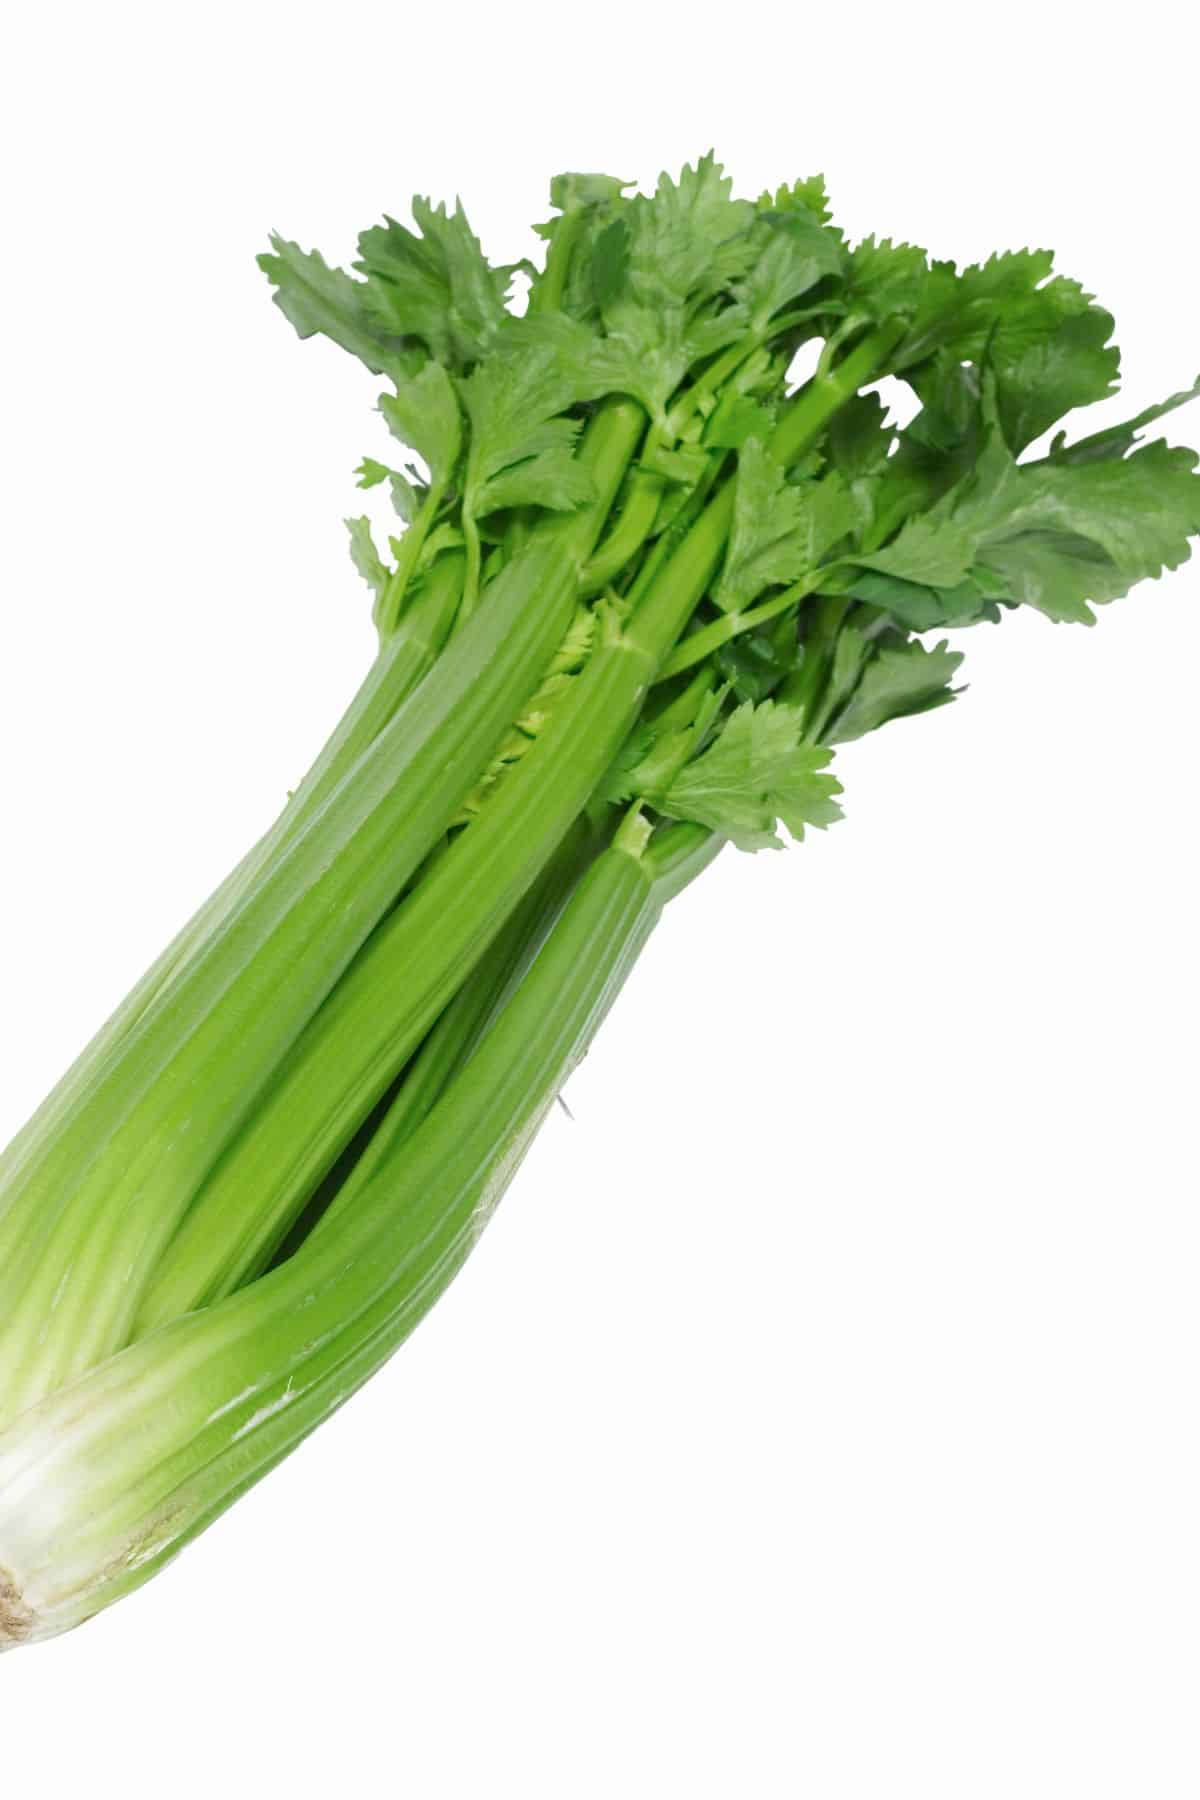 photo of celery on table.